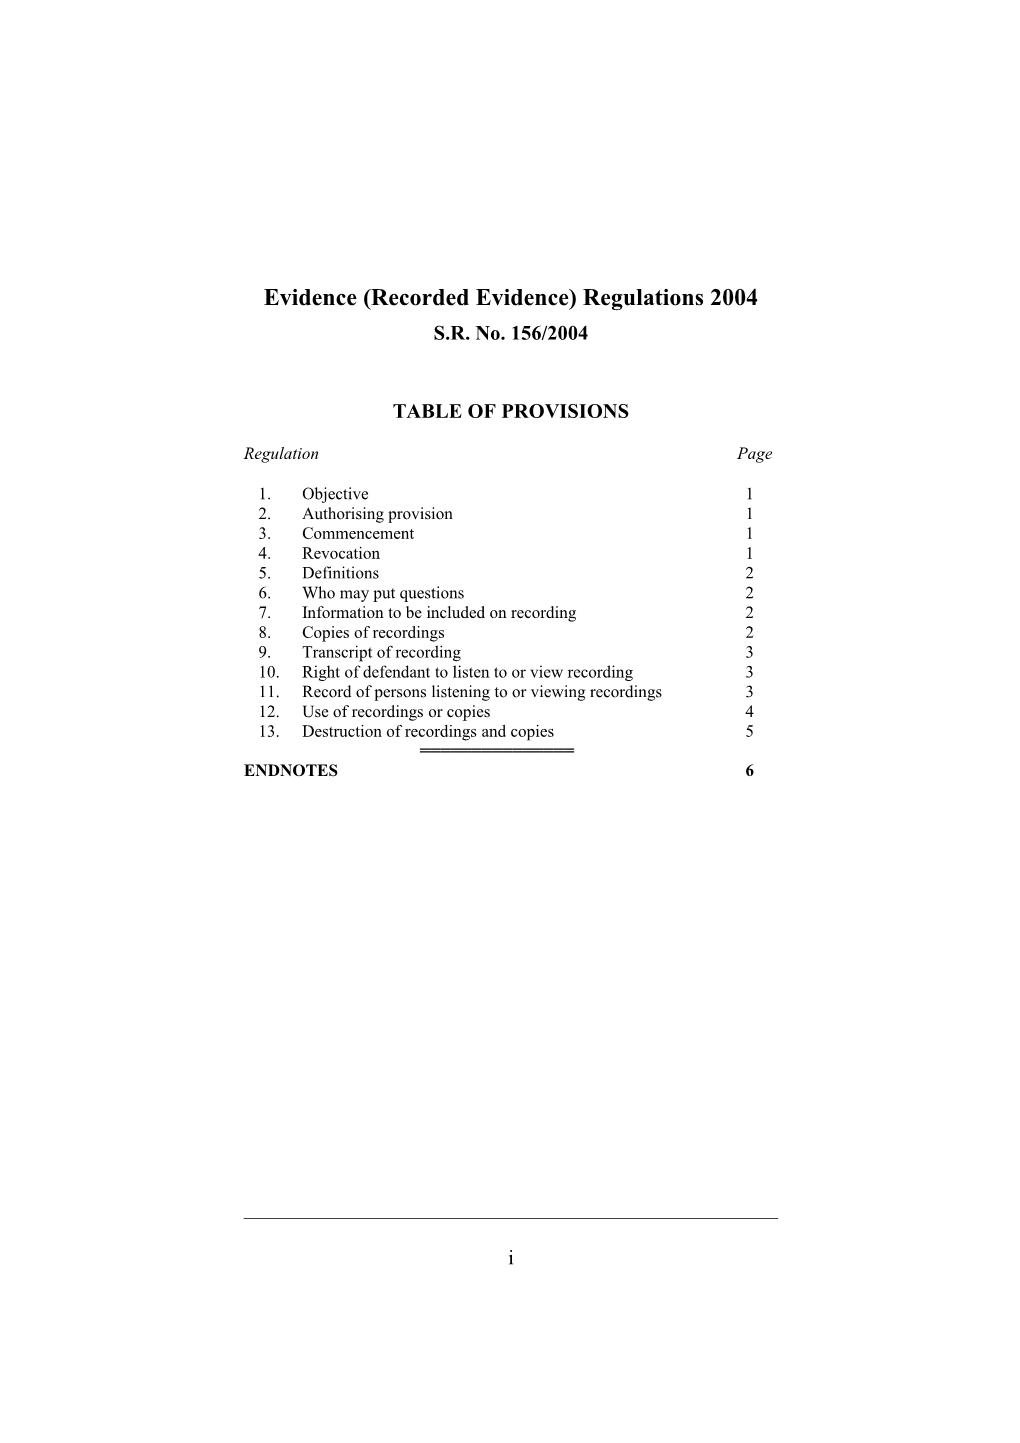 Evidence (Recorded Evidence) Regulations 2004